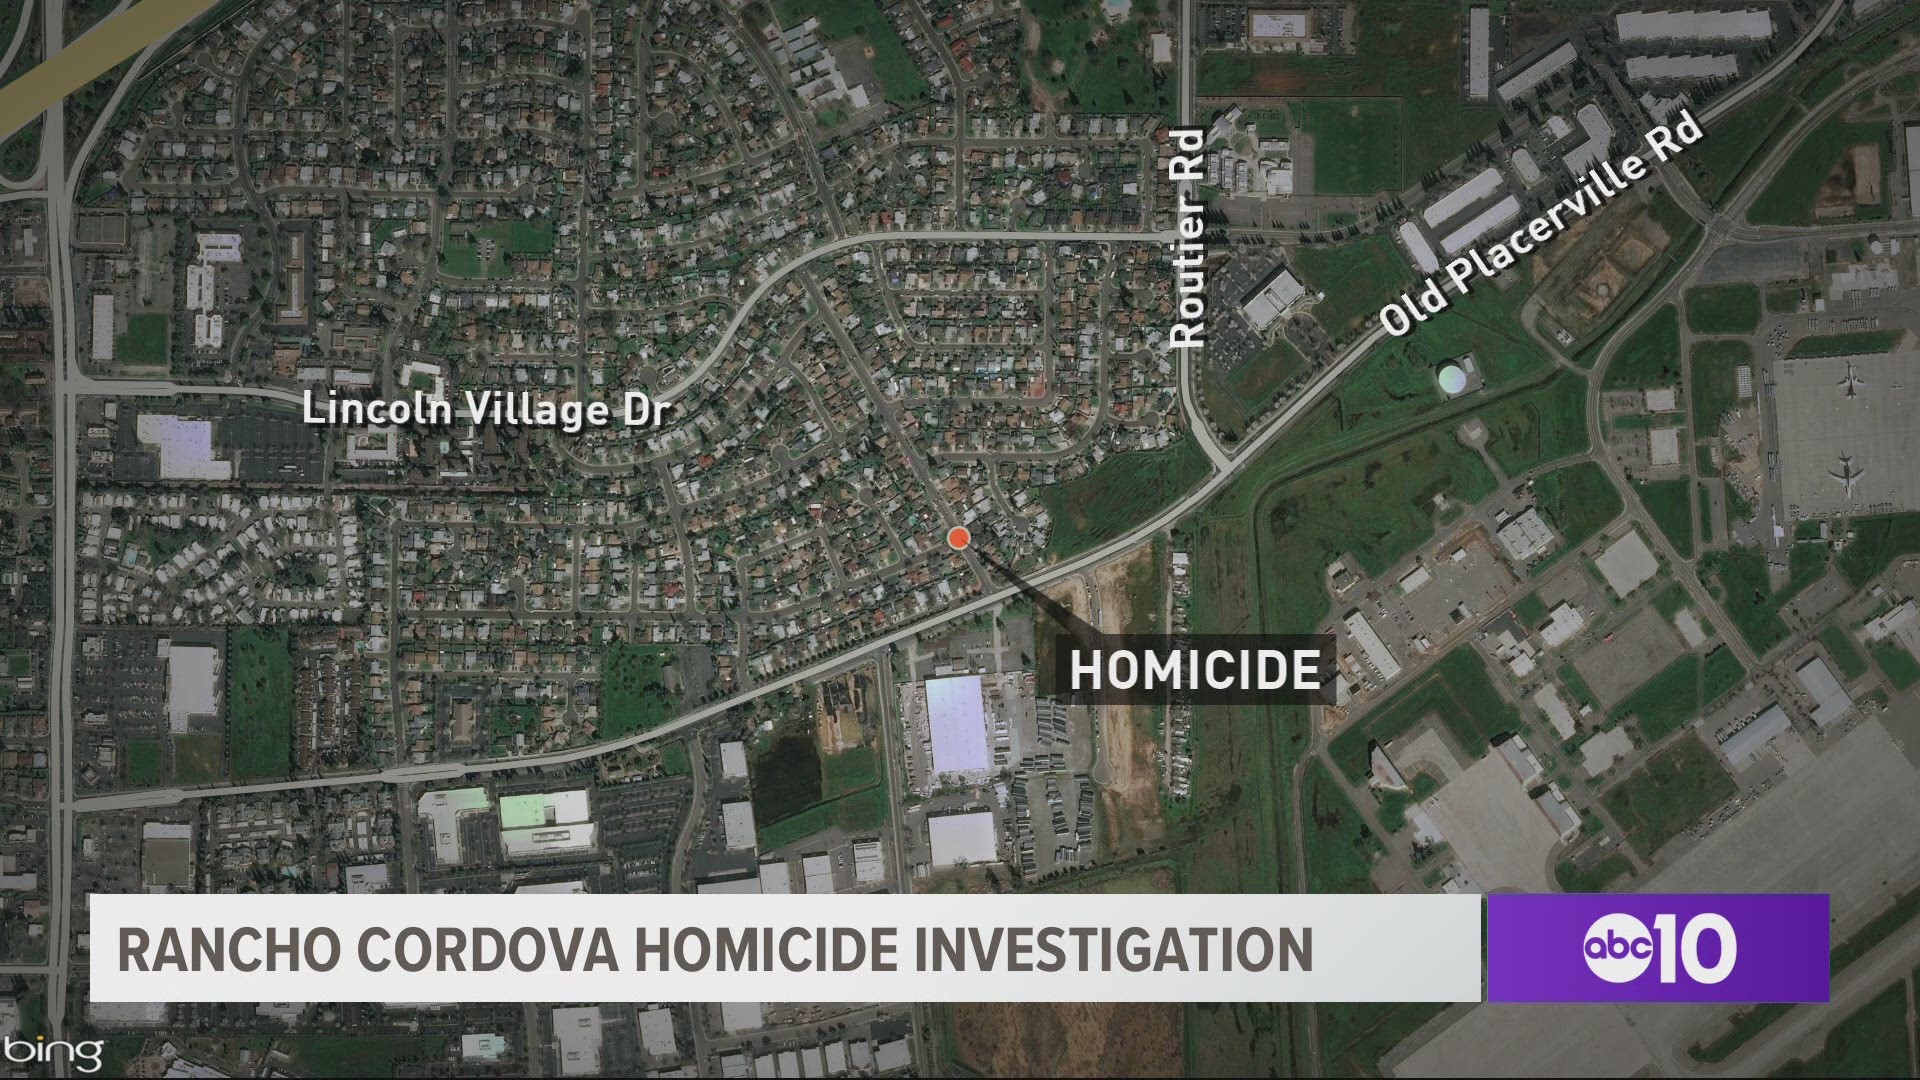 Witnesses are cooperating with Rancho Cordova police in regards to a shooting that left one man dead. 

According to a Facebook post, around 9:40 a.m. Saturday, Oct. 13, the Sacramento County Sheriff's Department received a shots fired call for the area